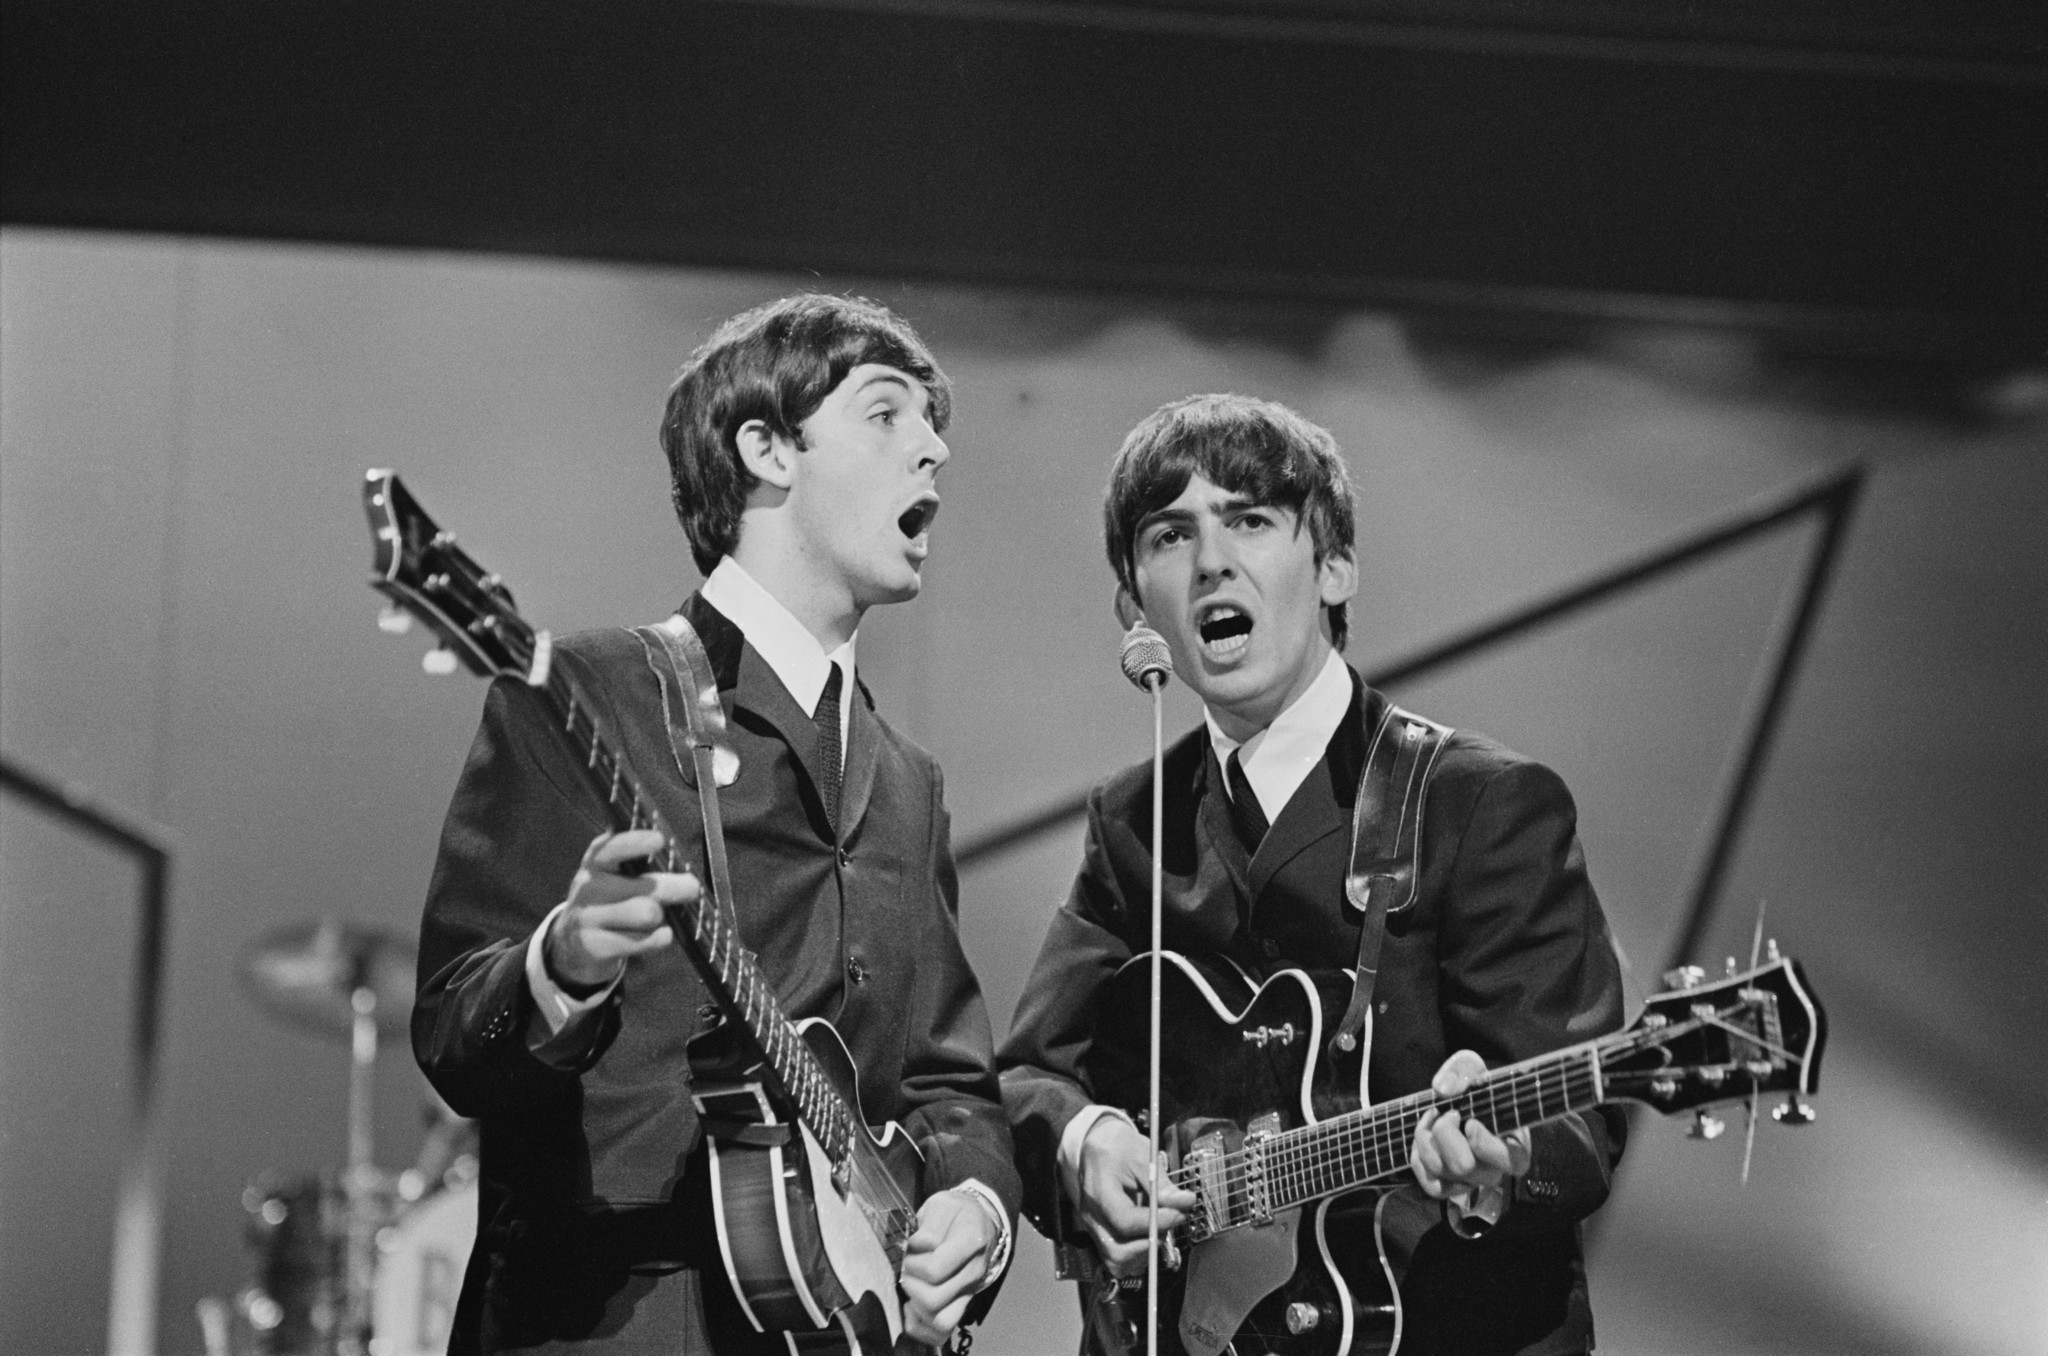 Paul McCartney and George Harrison of the Beatles perform on stage at the London Palladium on October 13, 1963.